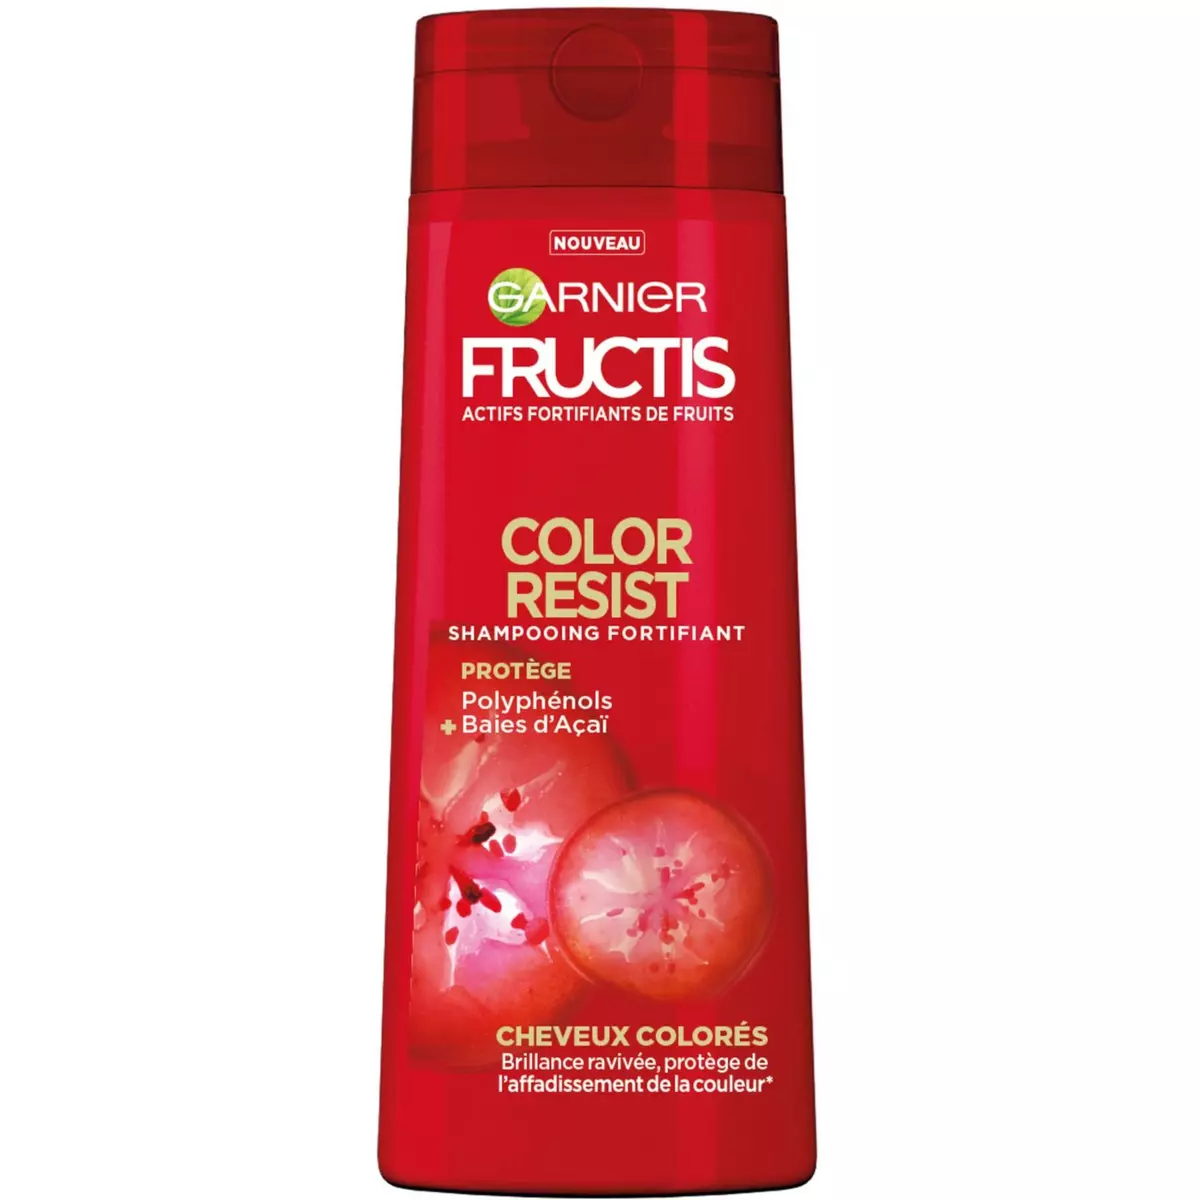 FRUCTIS Fructis shampooing color resist 250ml